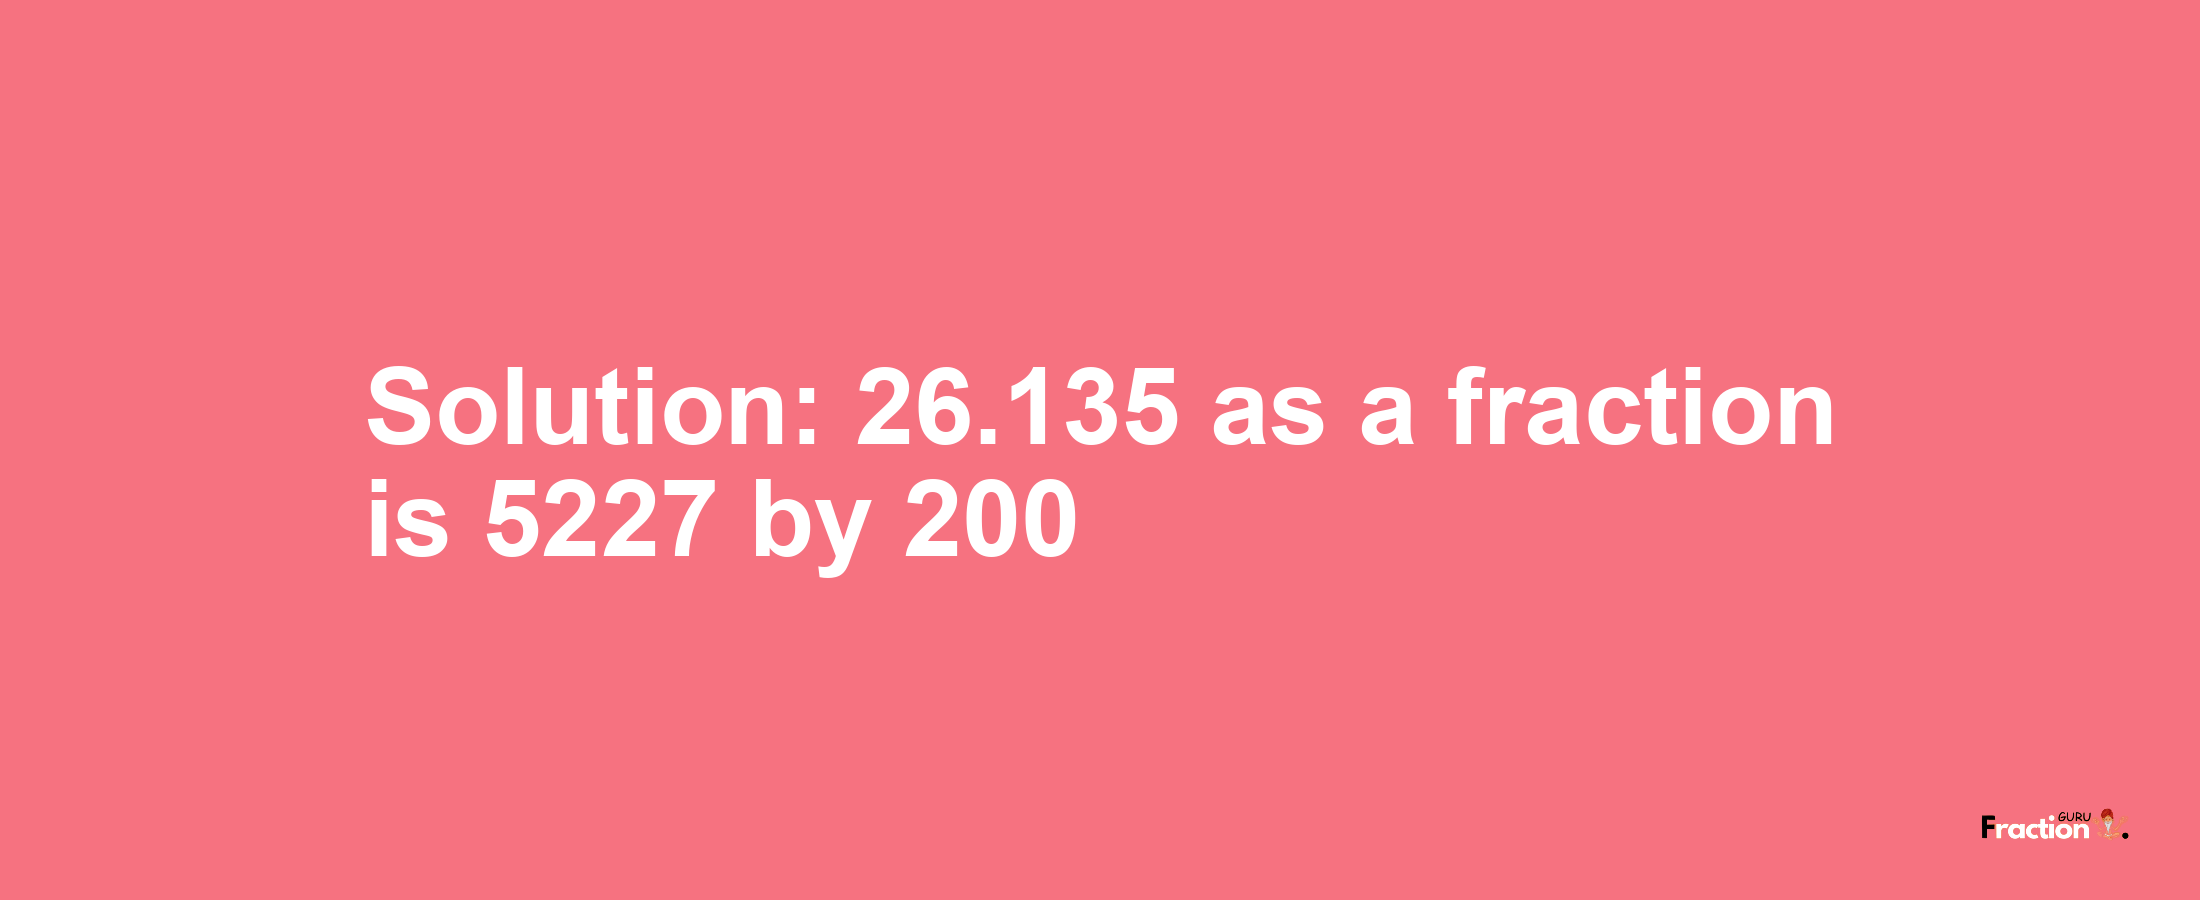 Solution:26.135 as a fraction is 5227/200